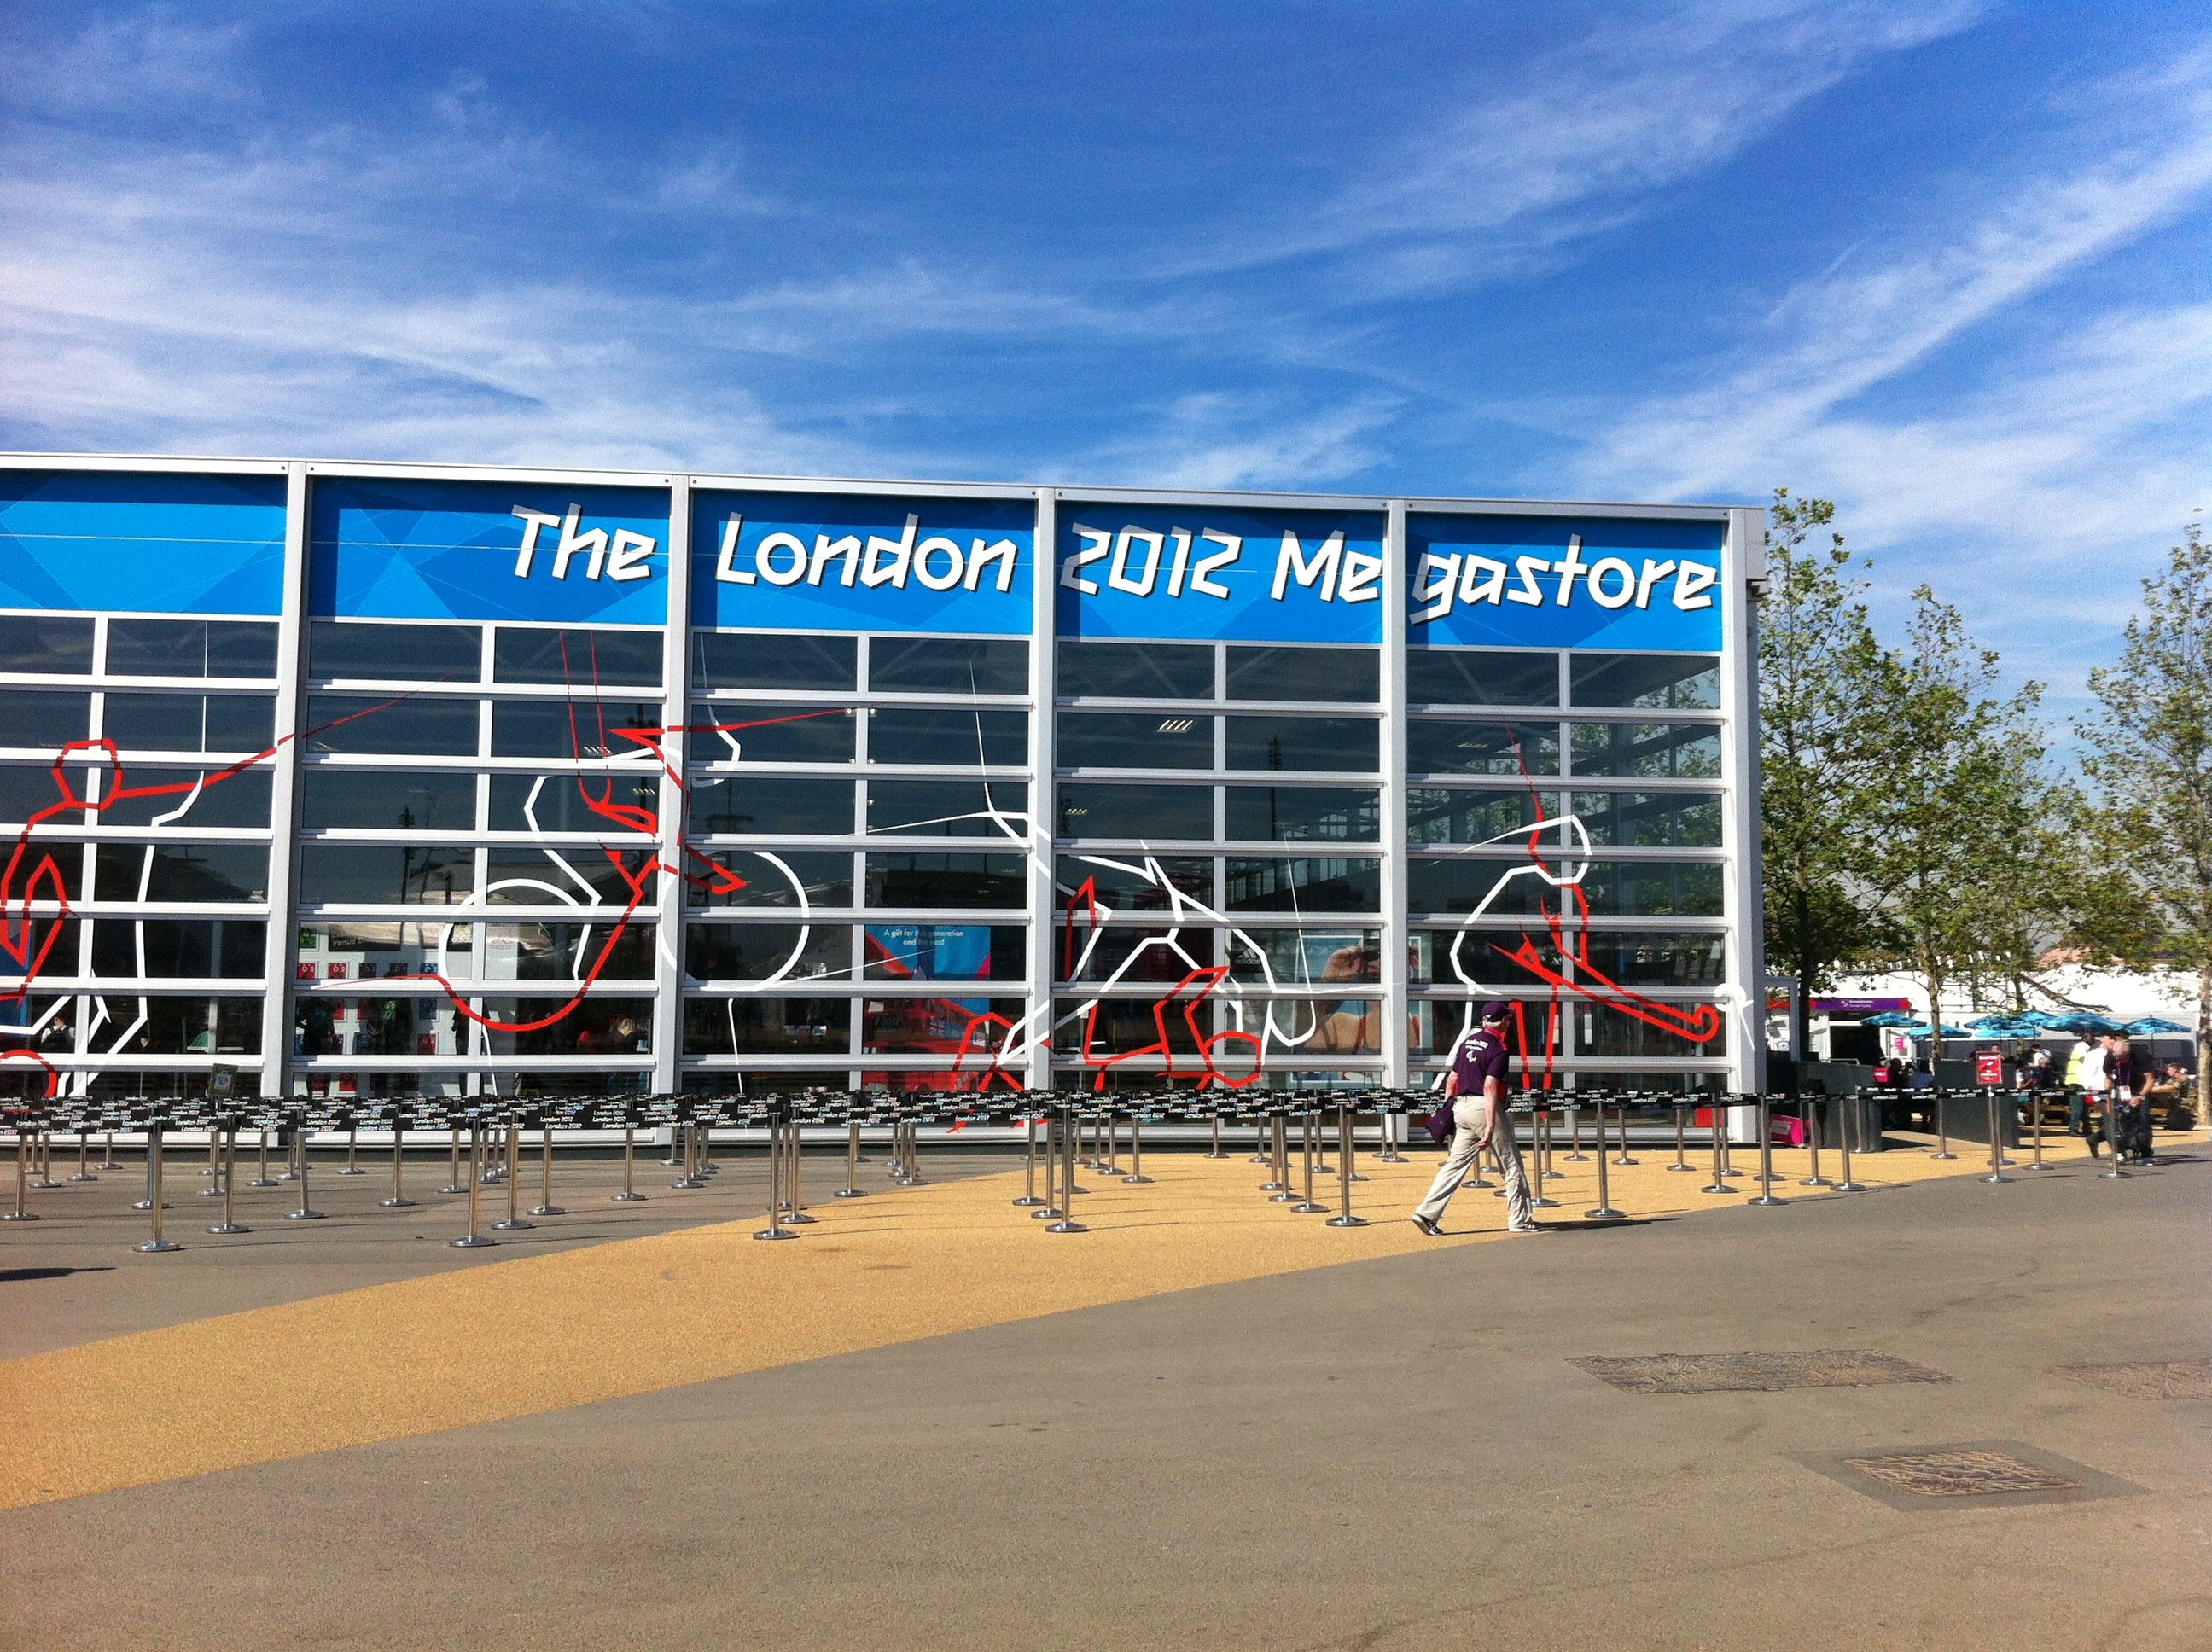 Procuring the Games – Commission for a Sustainable London 2012